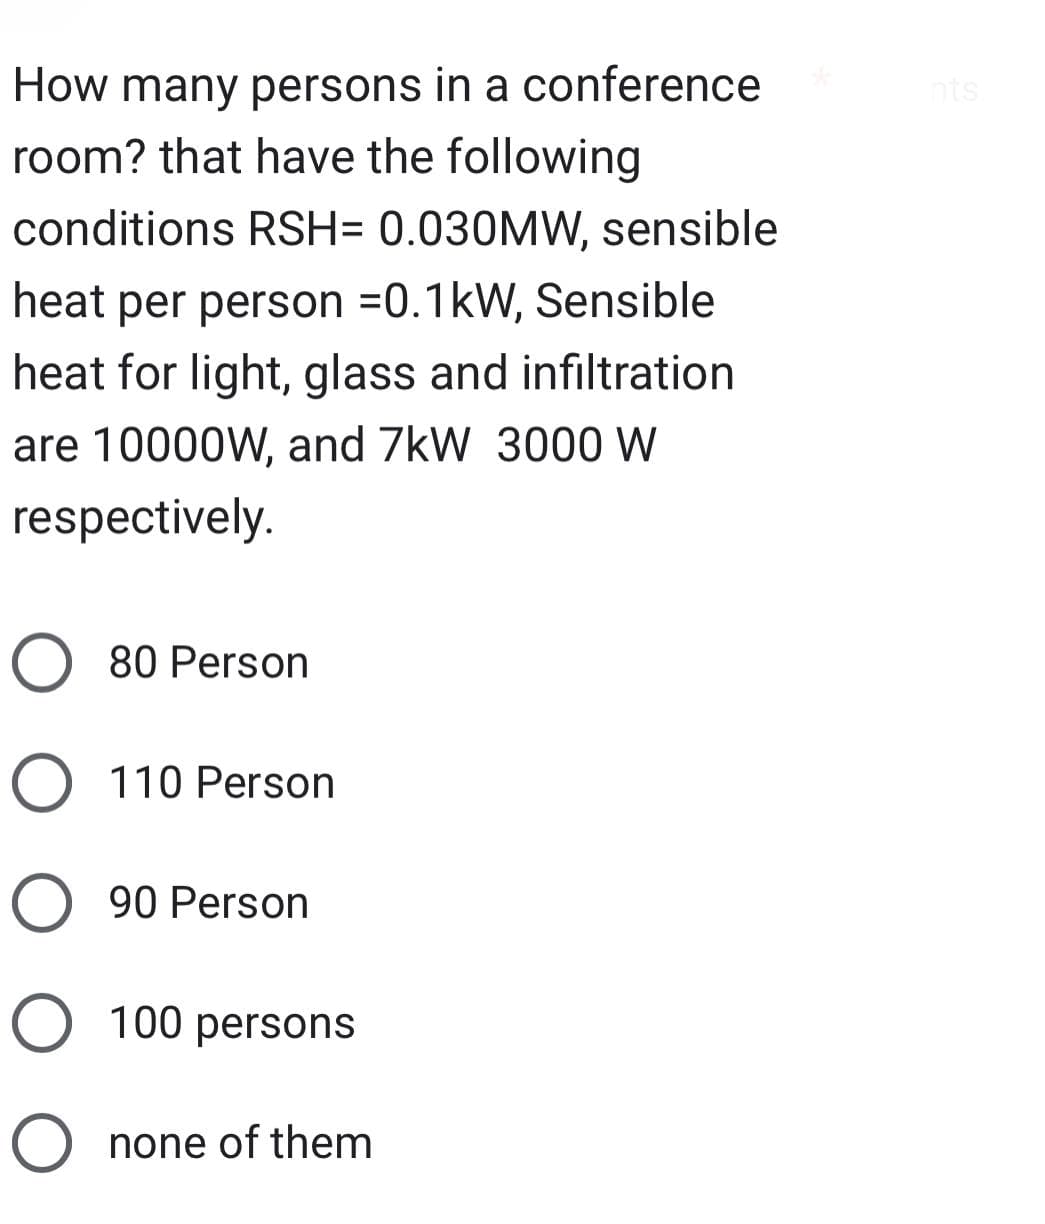 How many persons in a conference
room? that have the following
conditions RSH= 0.030MW, sensible
heat per person =0.1kW, Sensible
heat for light, glass and infiltration
are 10000W, and 7kW 3000 W
respectively.
O 80 Person
O 110 Person
O 90 Person
O 100 persons
O none of them
nts